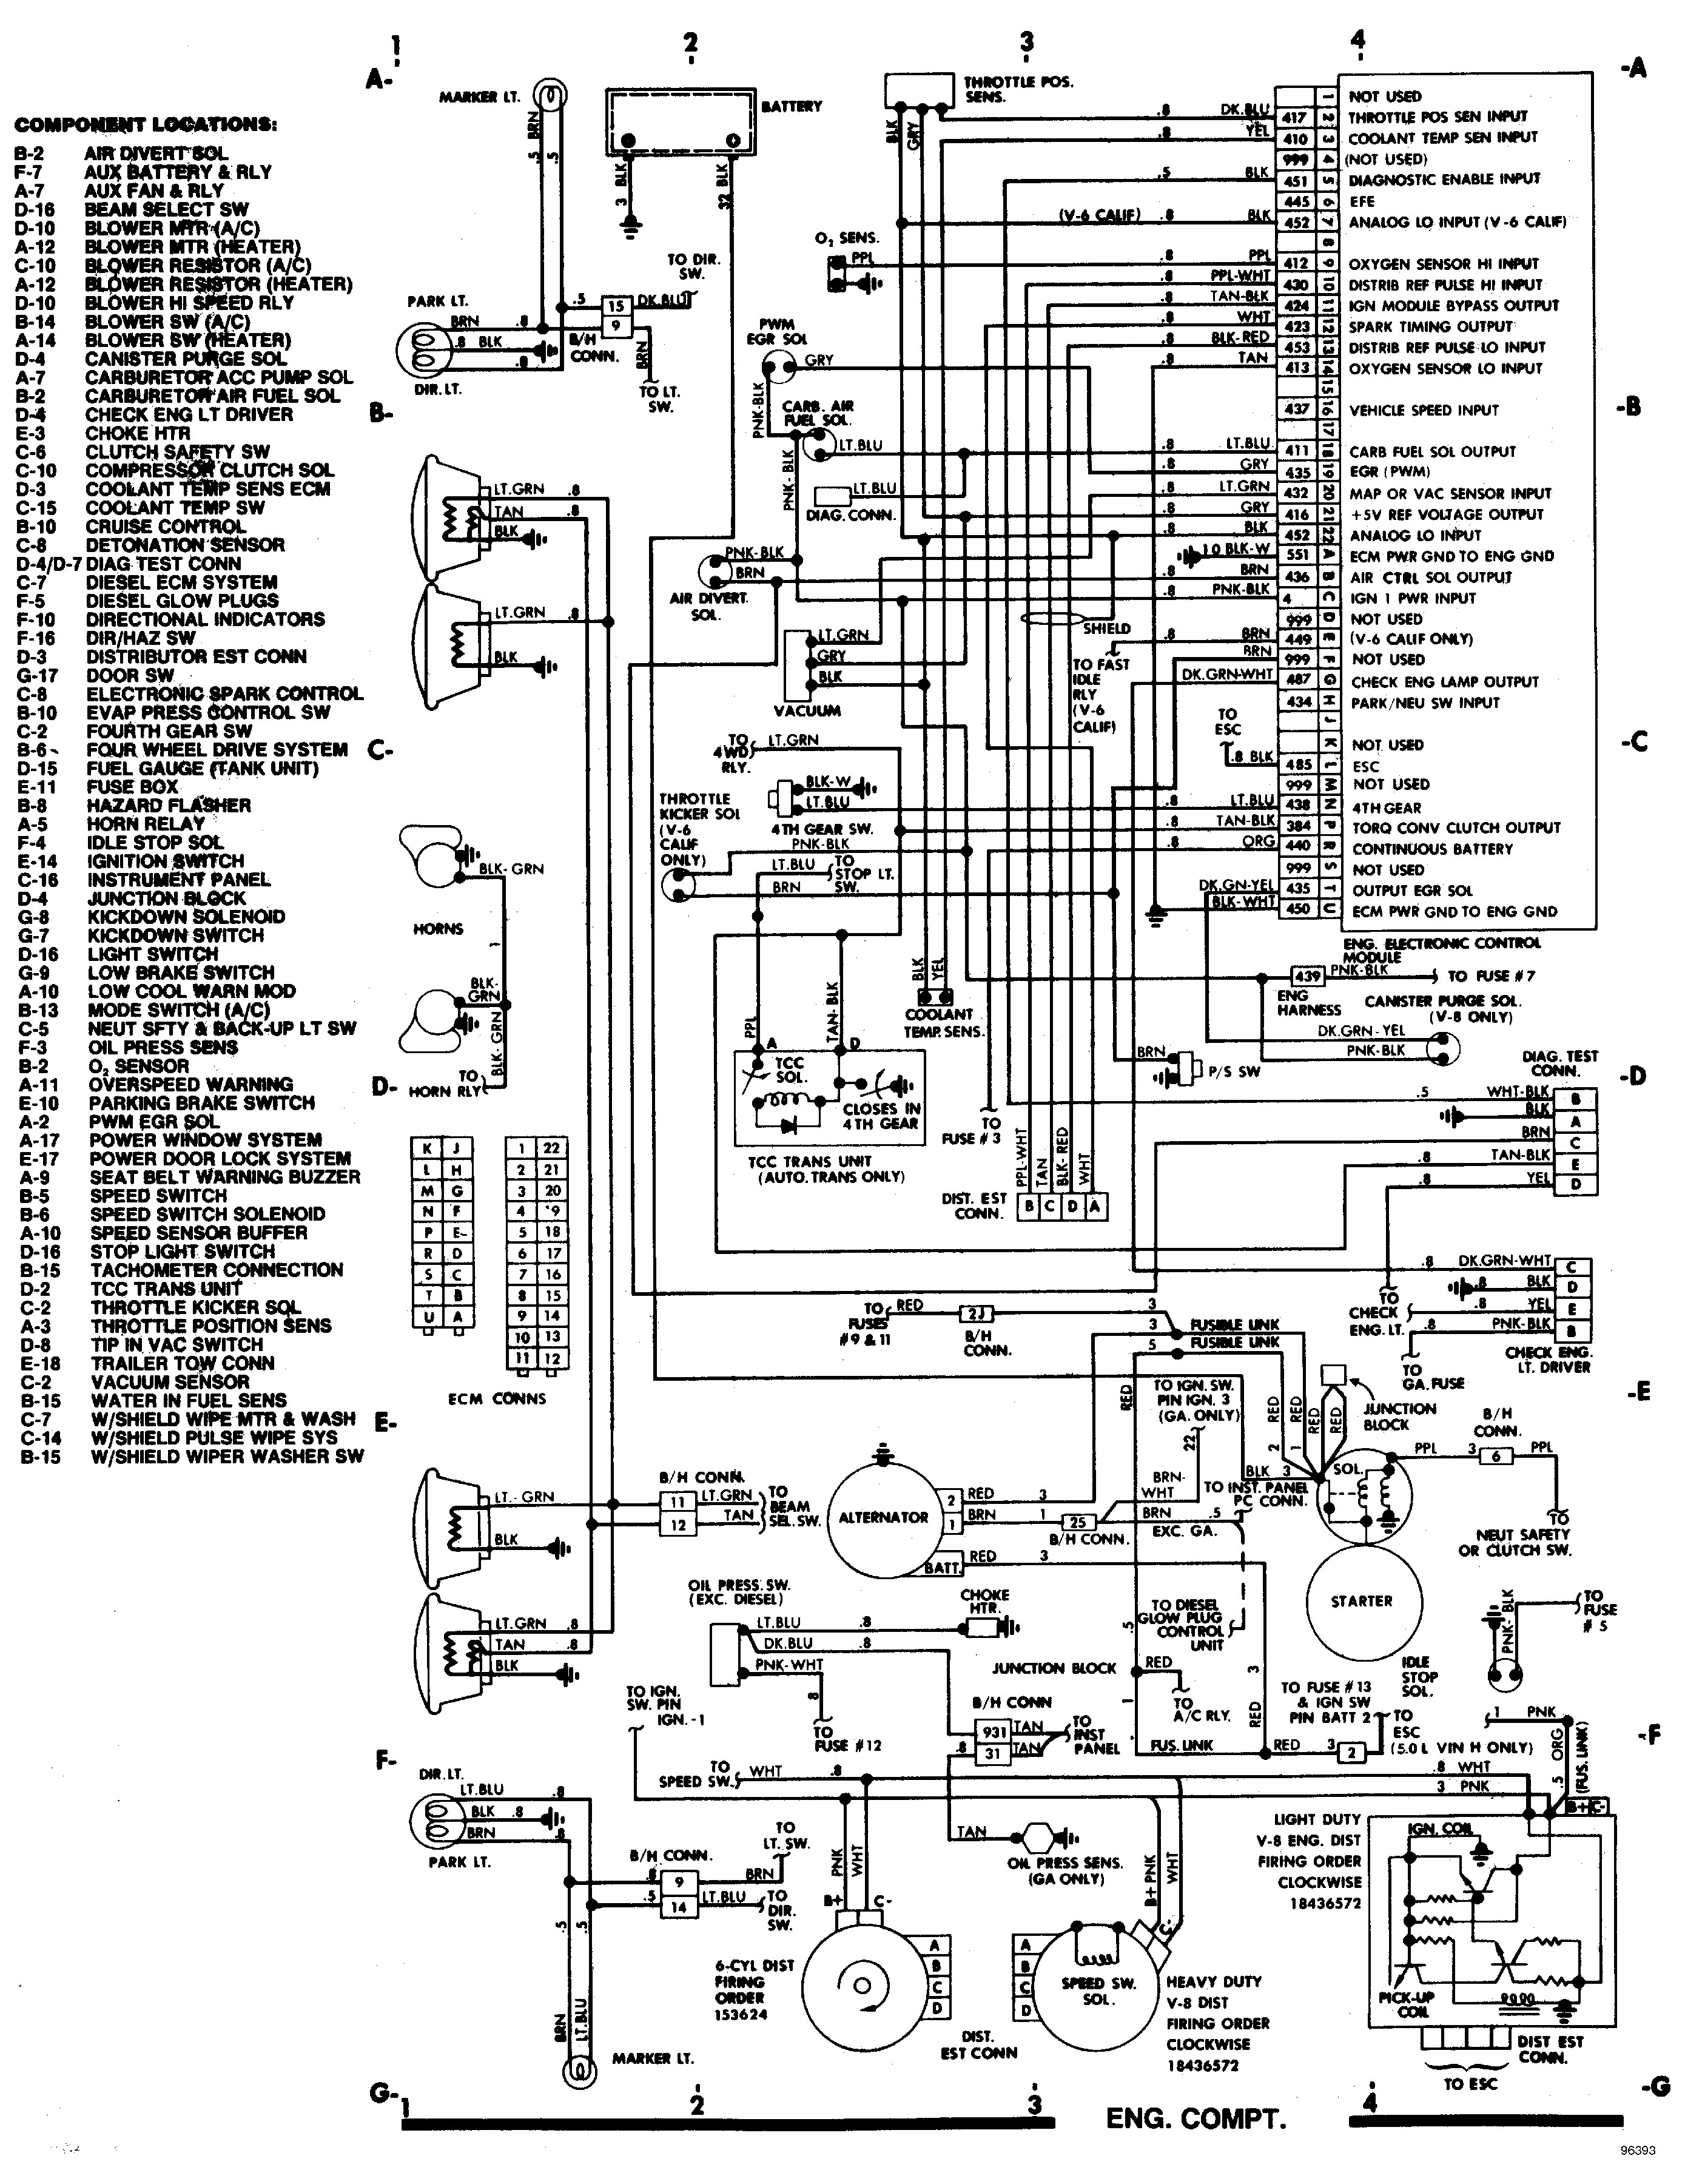 Engine Wiring Diagrams 94 Chevy Blower Motor Diagram Free Download Wiring Diagram Schematic Of Engine Wiring Diagrams